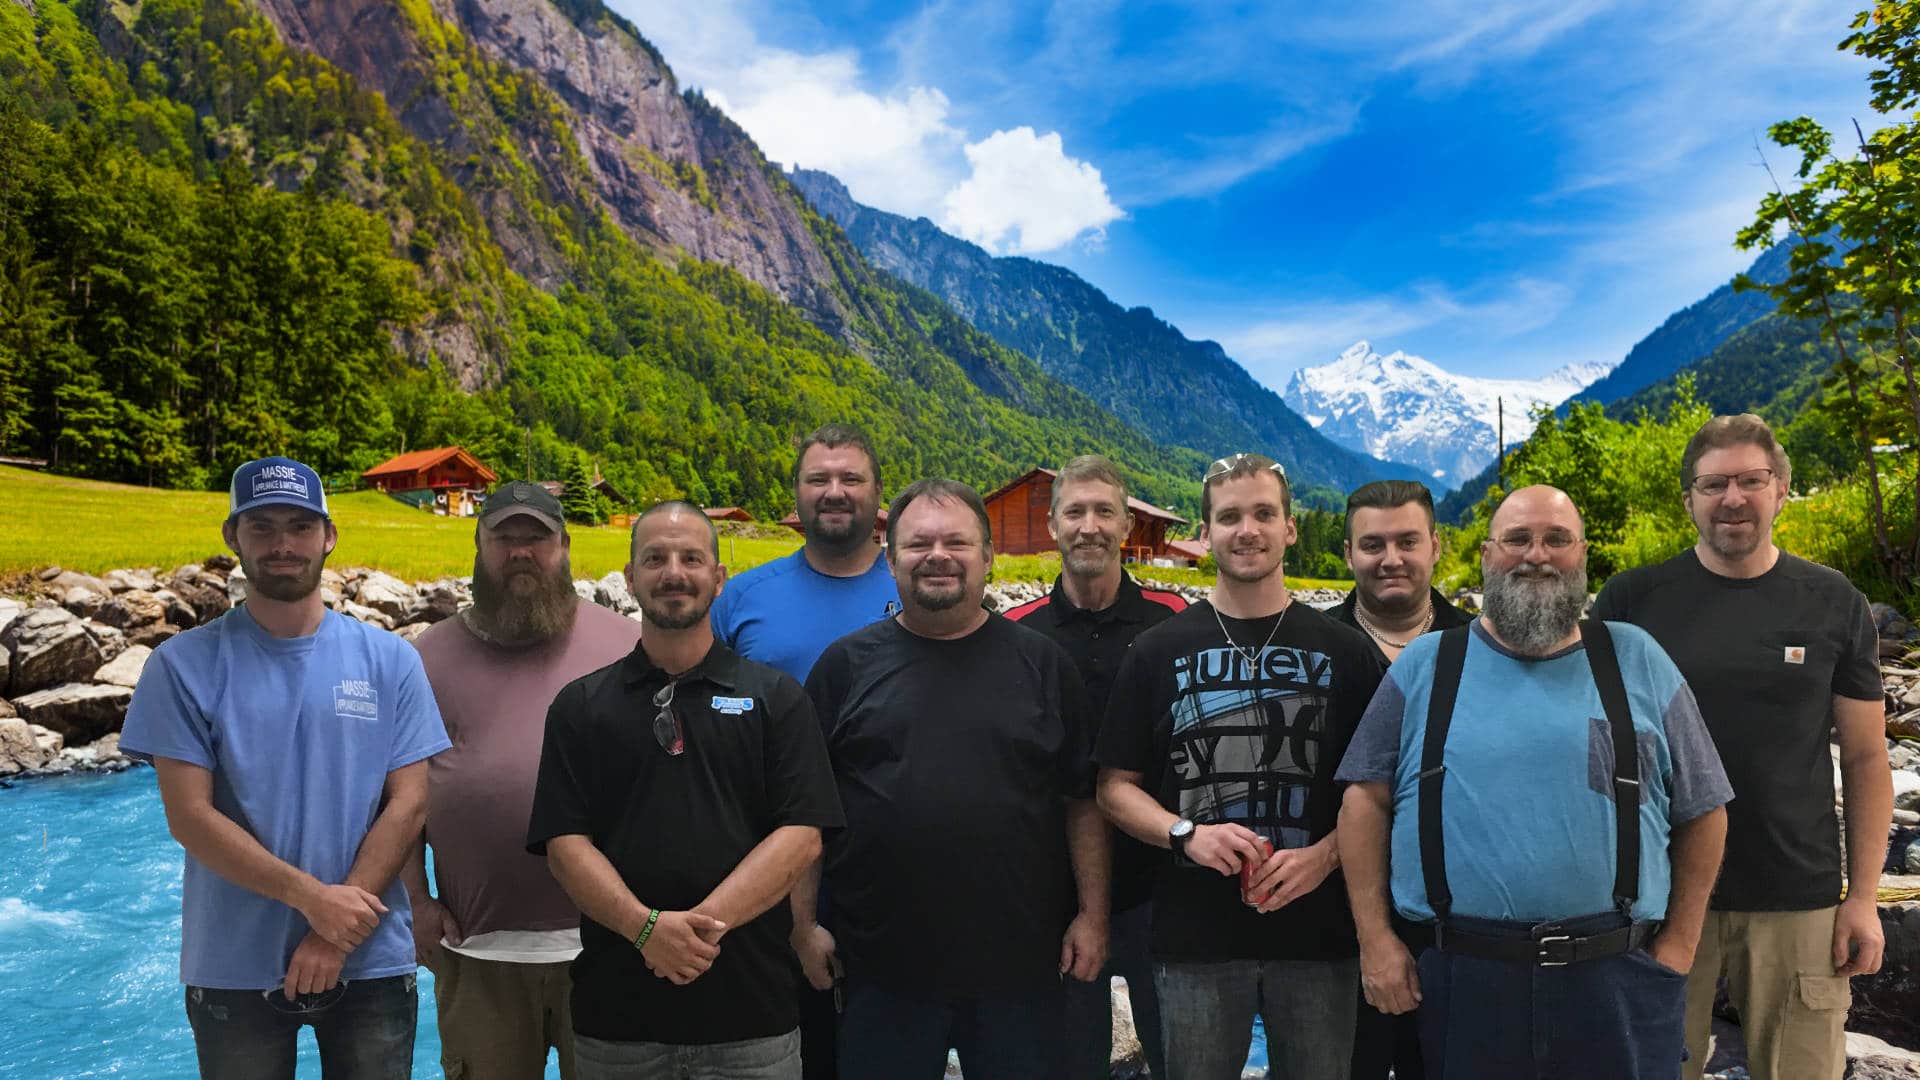 Featured image for “Congrats to our graduating July 2018 Refrigeration class”